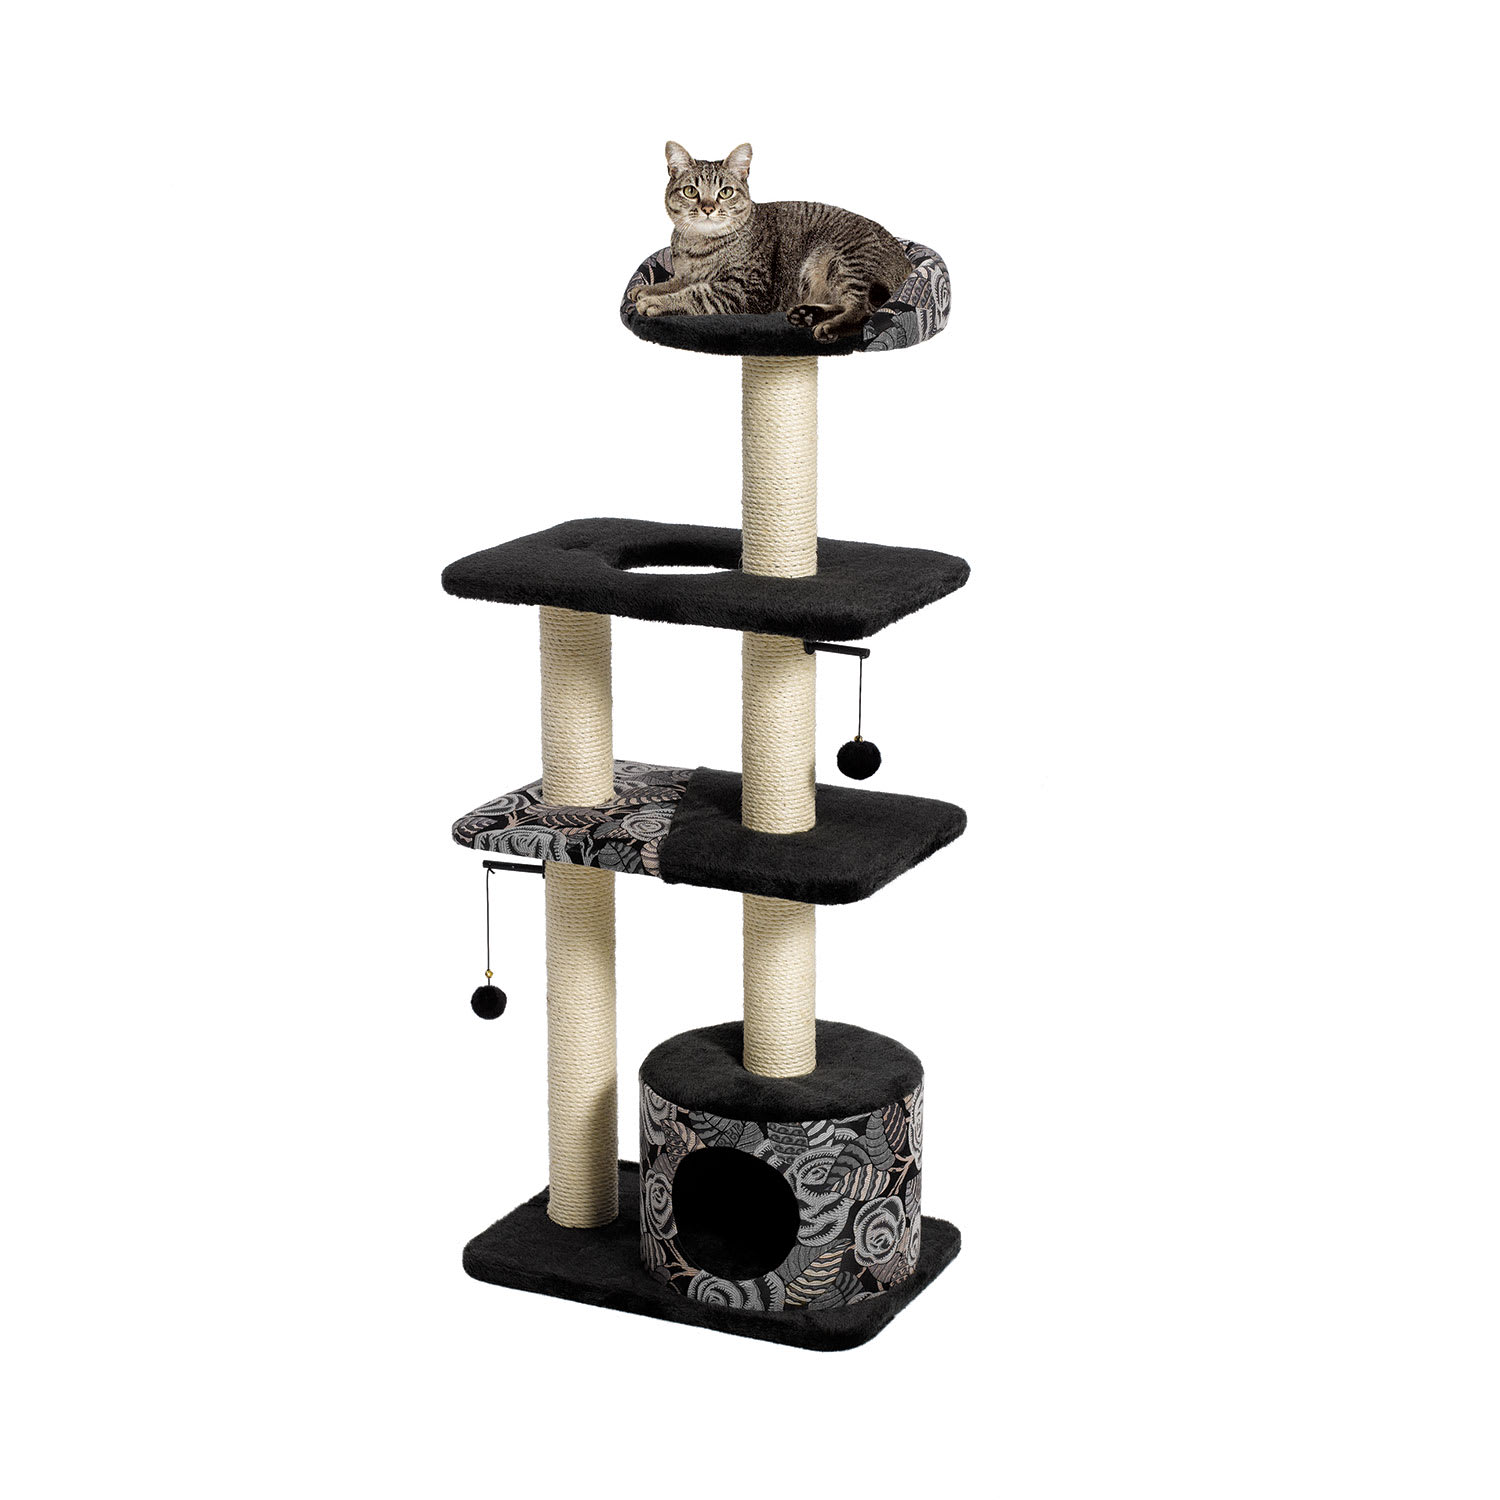 Photos - Other for Cats Midwest Tower Cat Tree, 50.5" H, 22 IN, Black 138T-BK 